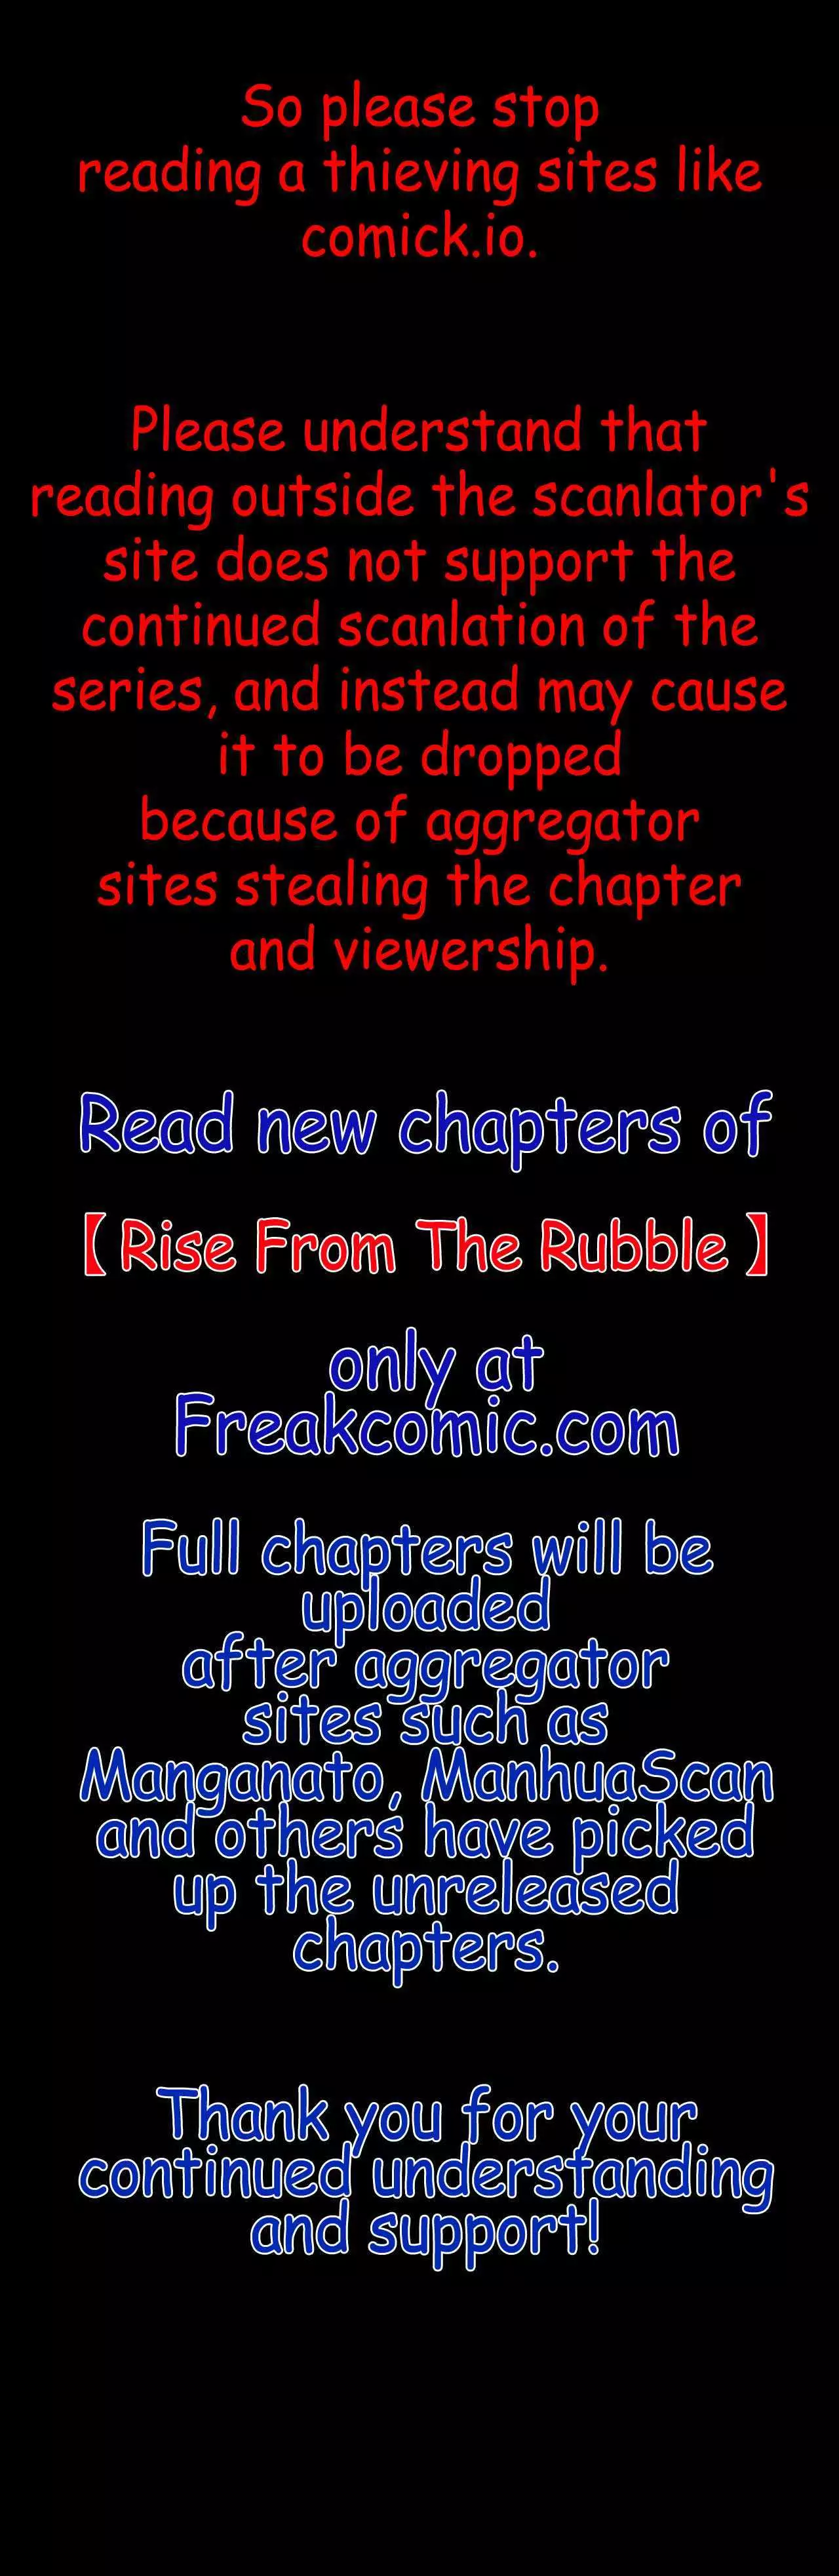 Rise From The Rubble - 270.1 page 2-87562f4b